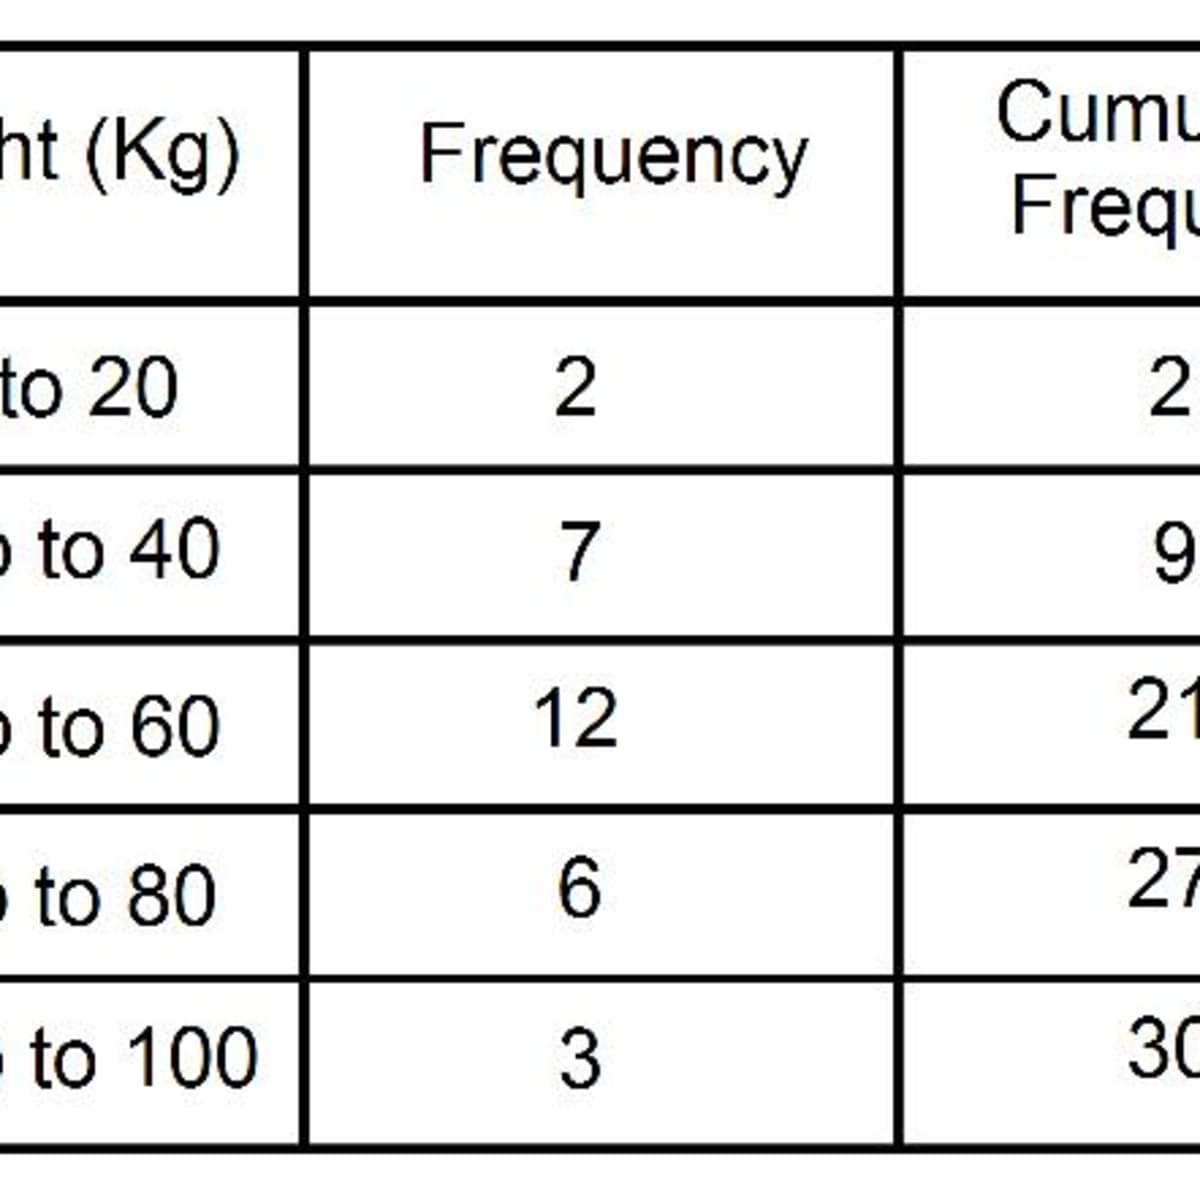 Cumulative Frequency Tables How To Work Out The The Cumulative